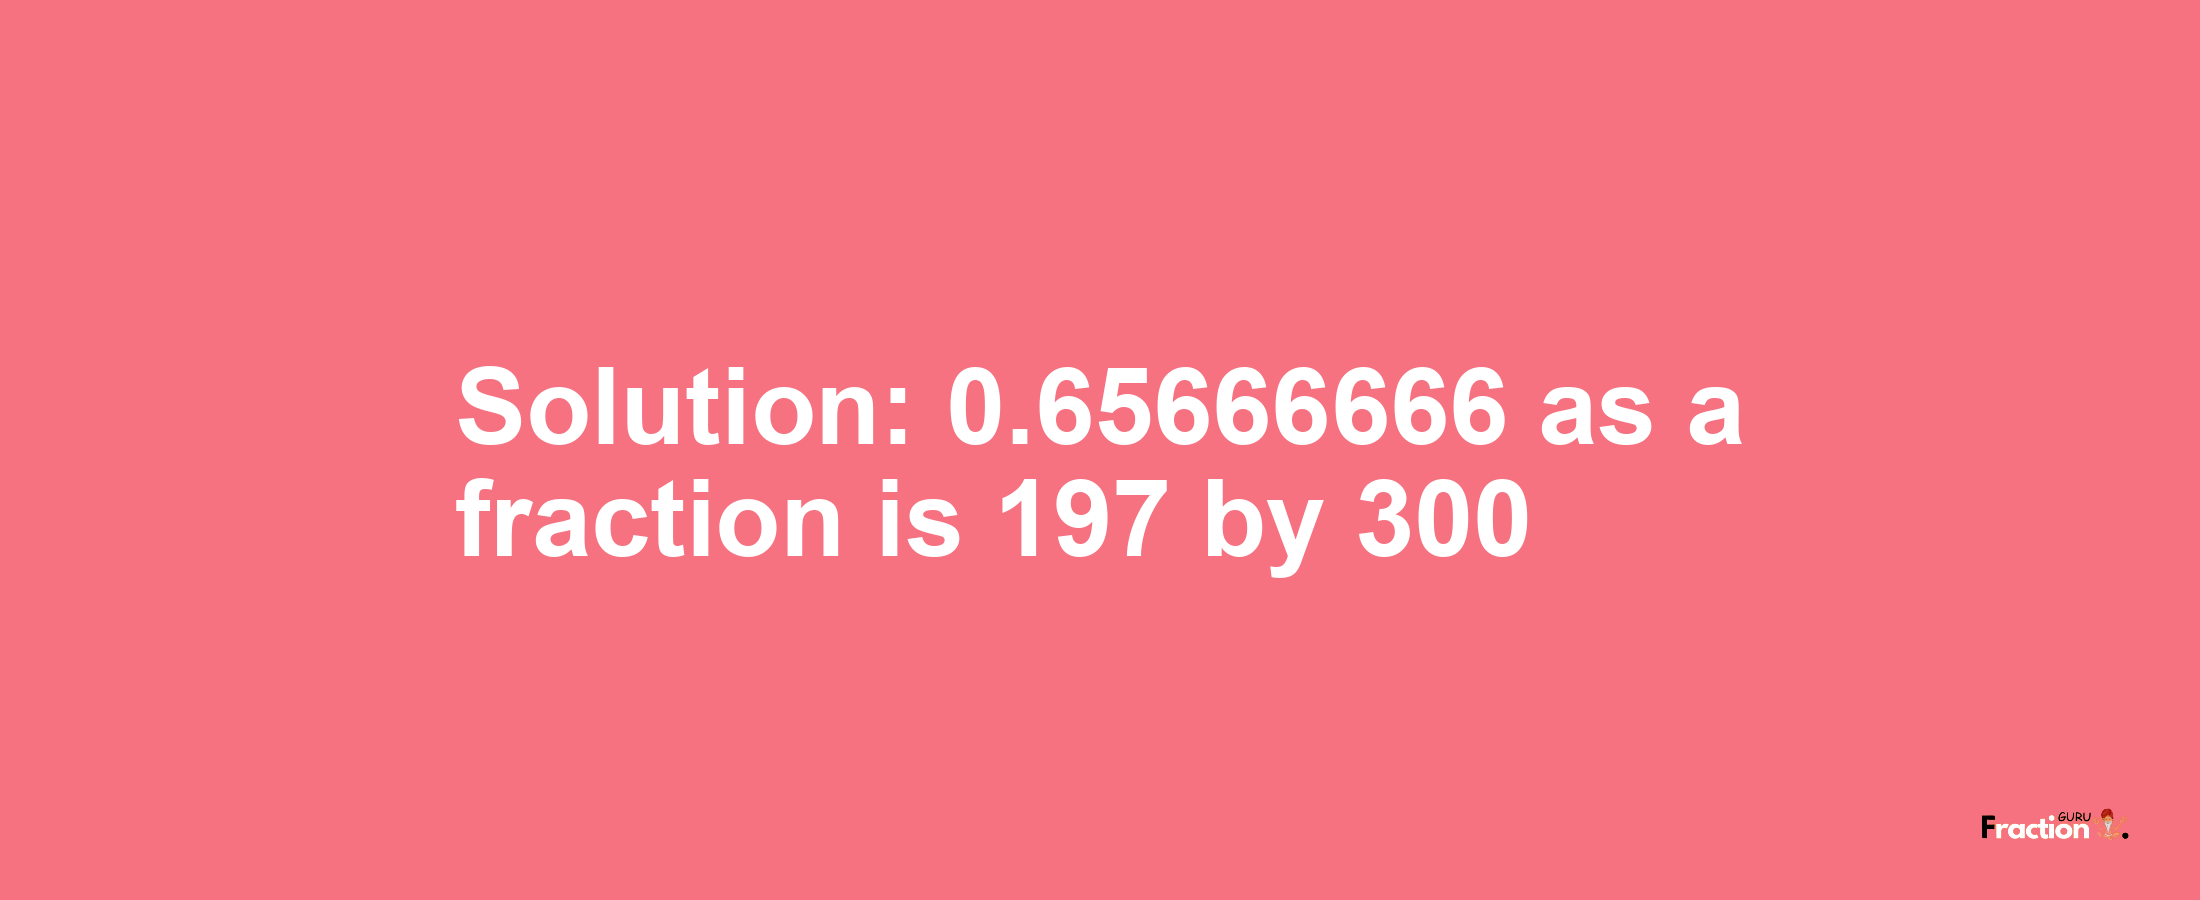 Solution:0.65666666 as a fraction is 197/300